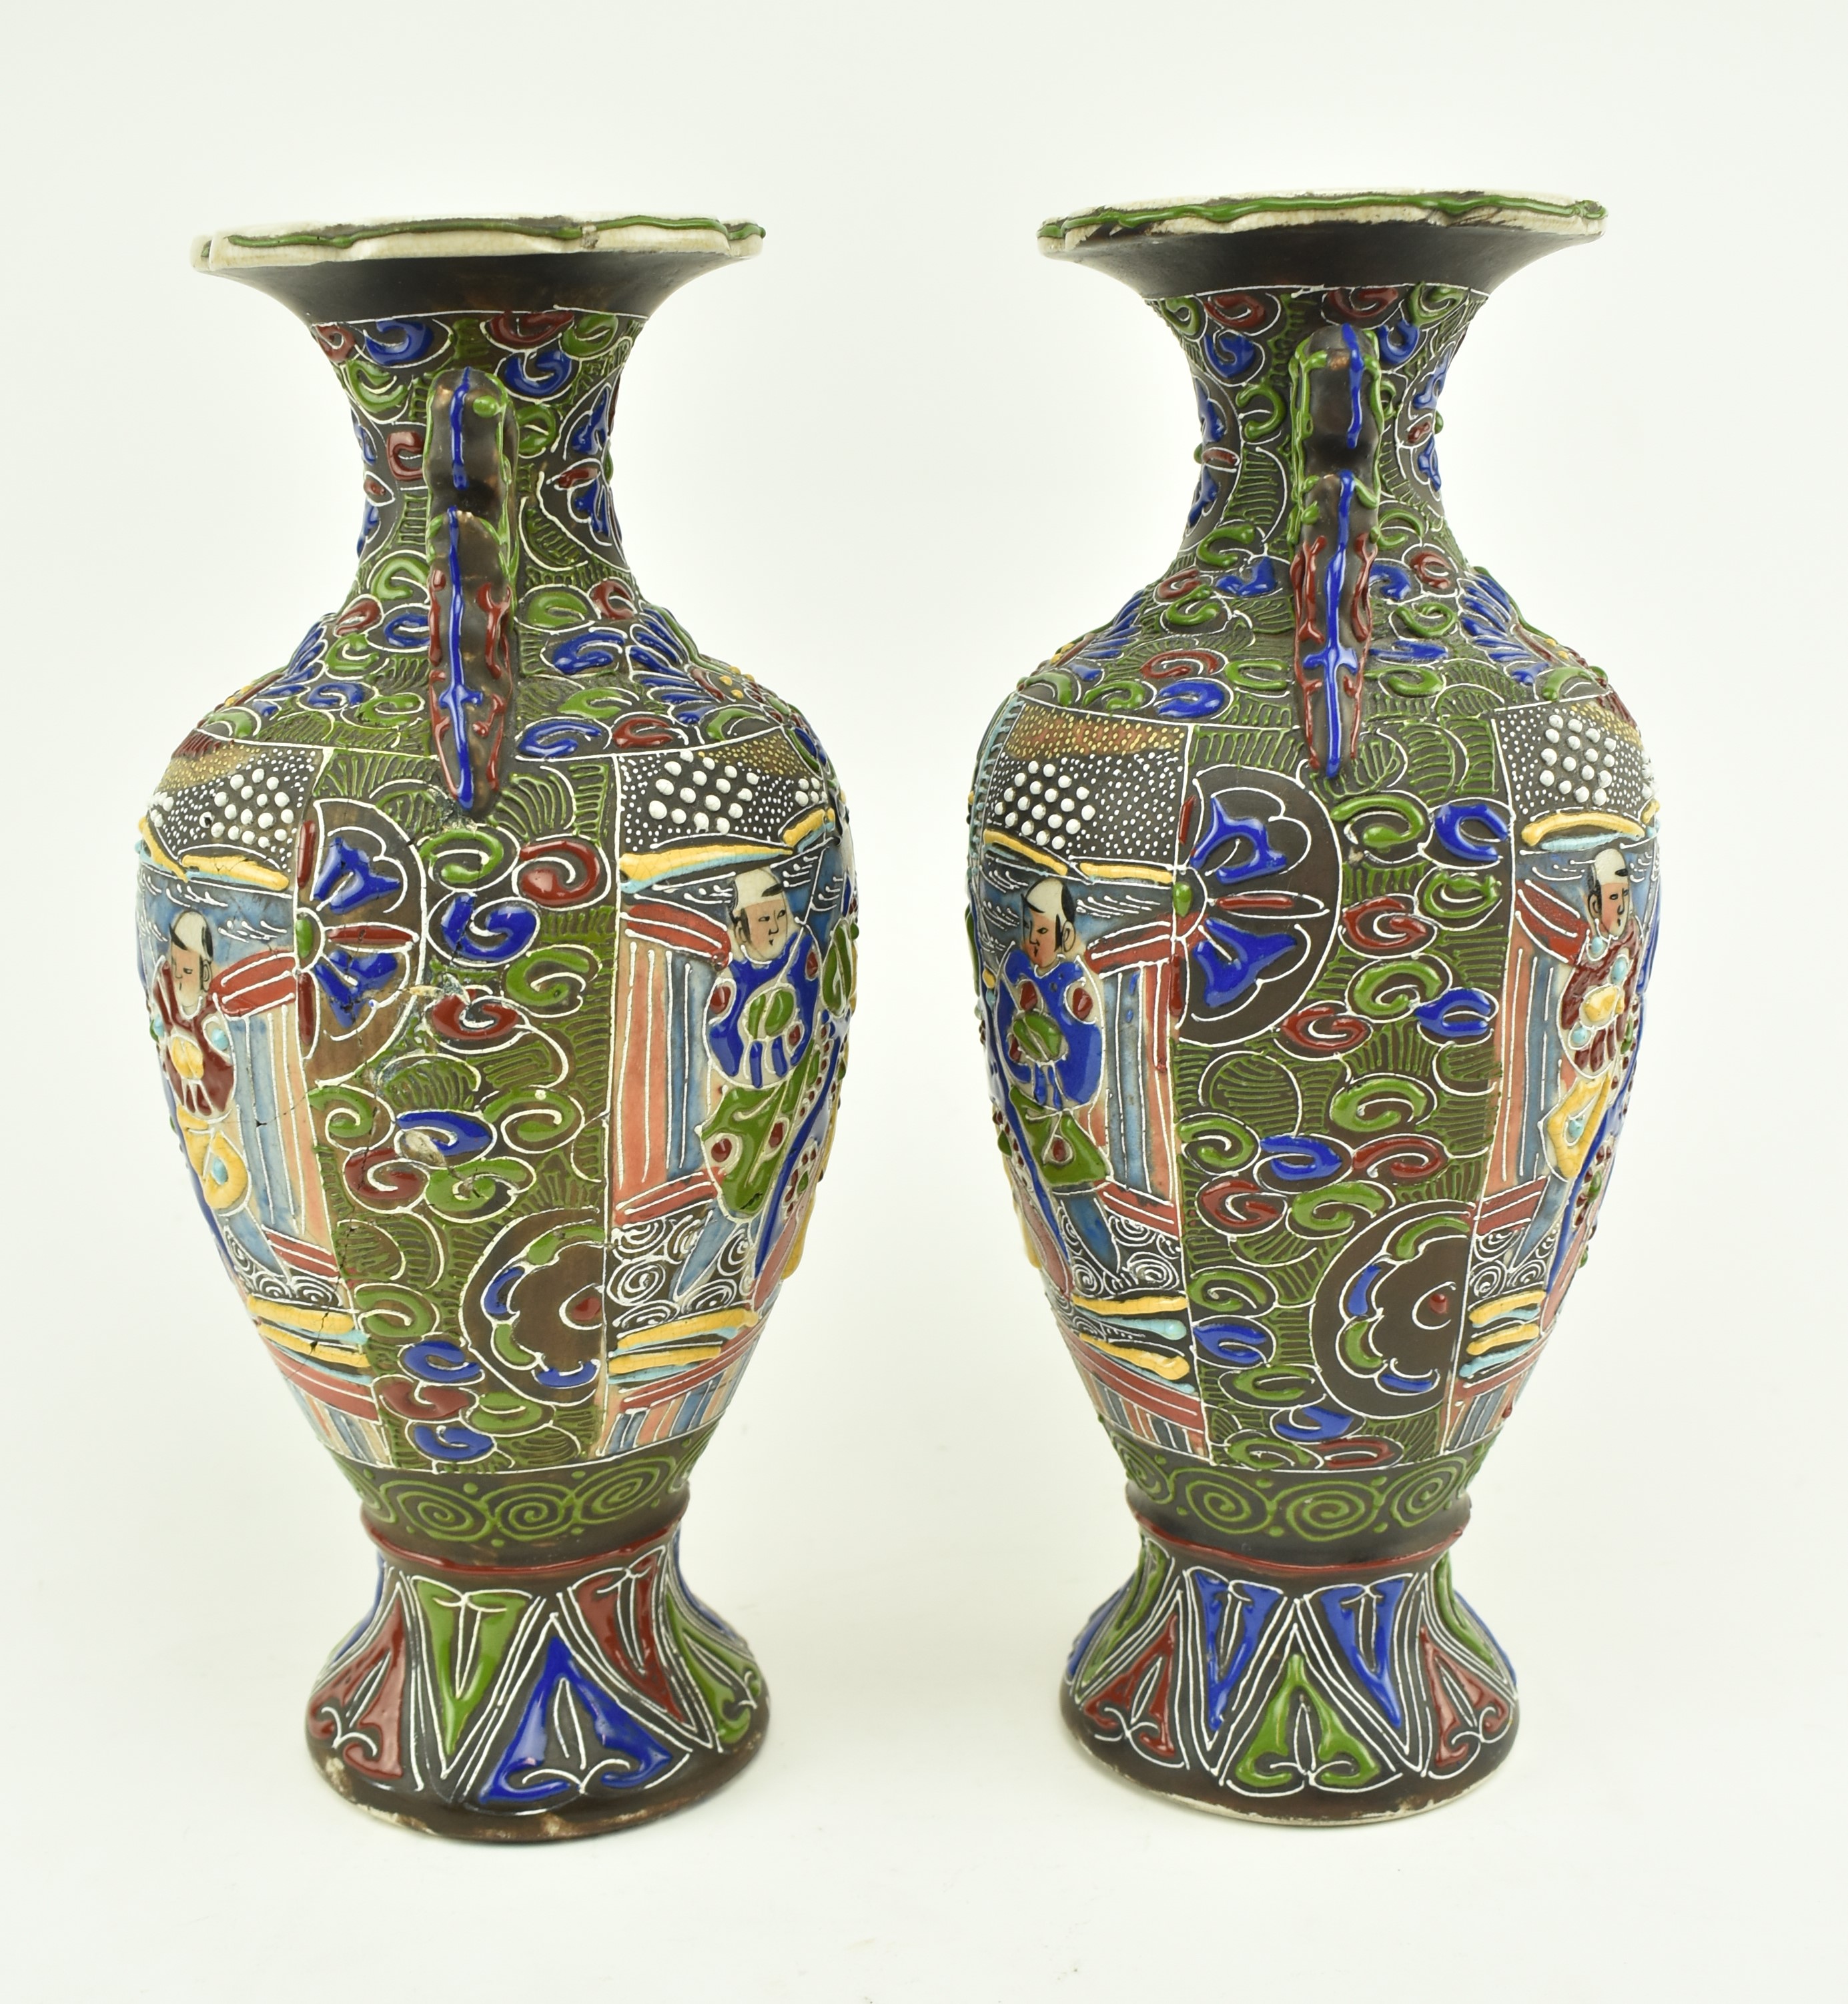 PAIR OF JAPANESE EARLY 20TH CENTURY MORIAGE CERAMIC VASES - Image 3 of 5